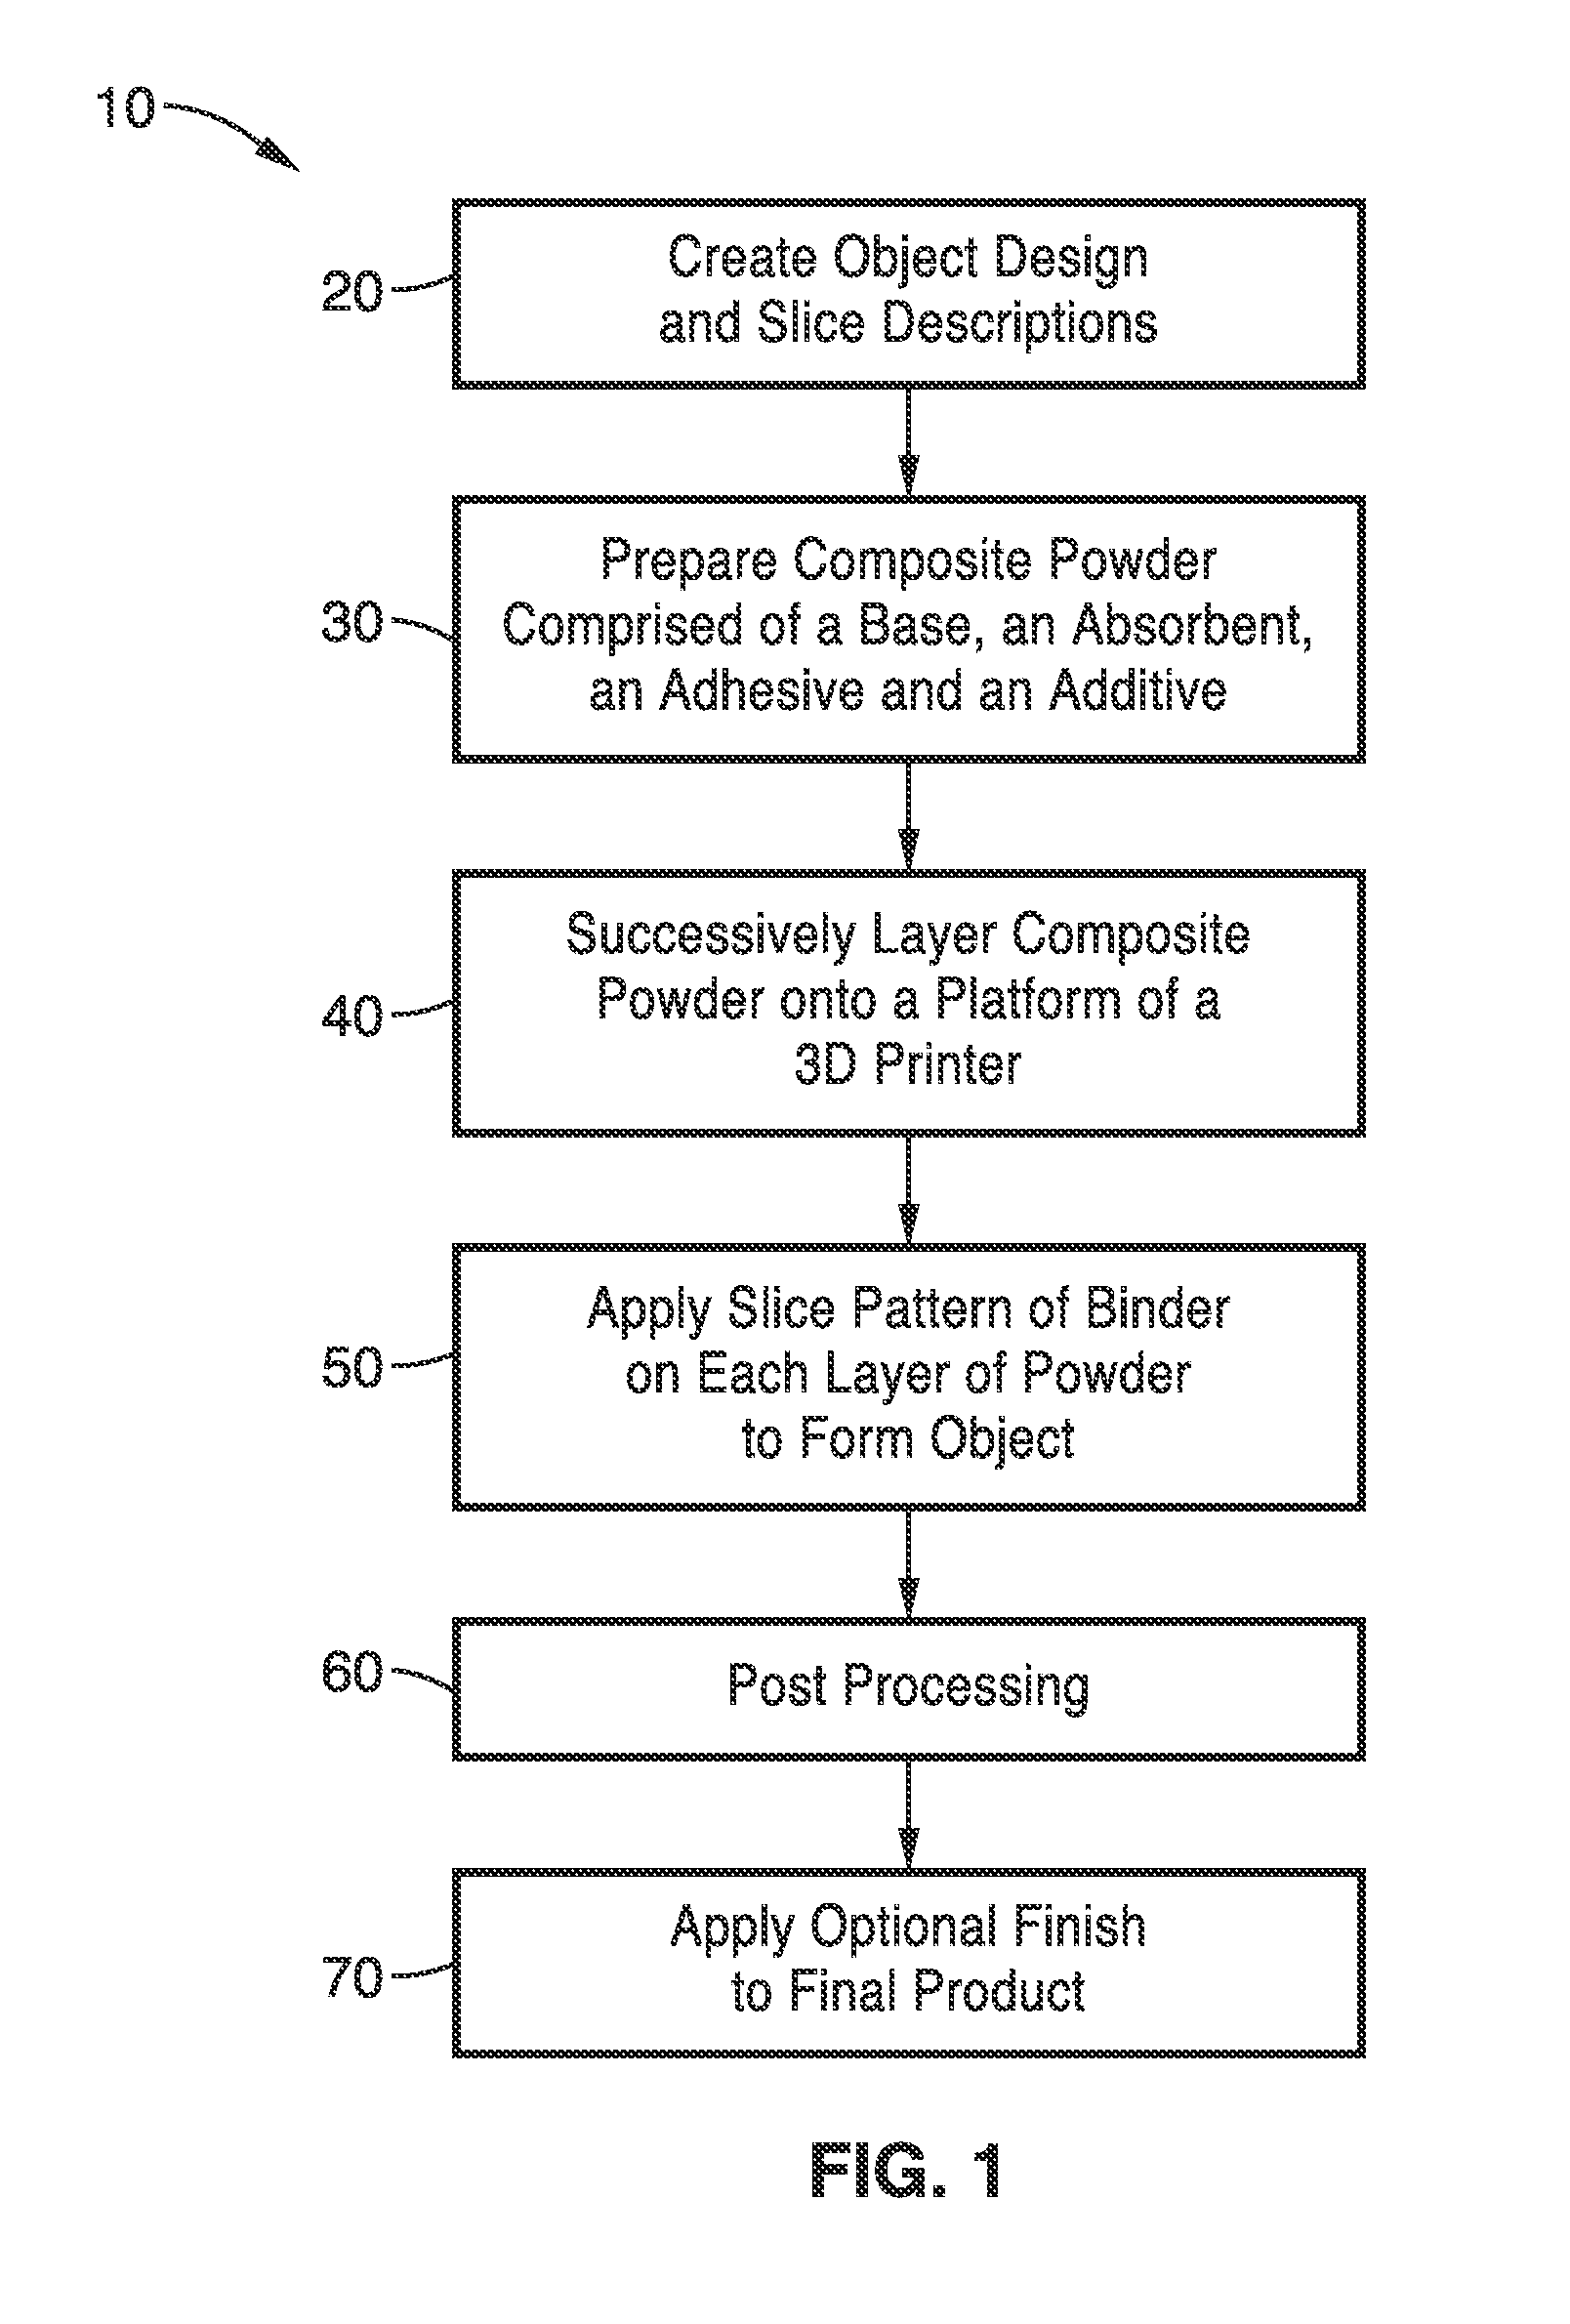 3D printing powder compositions and methods of use